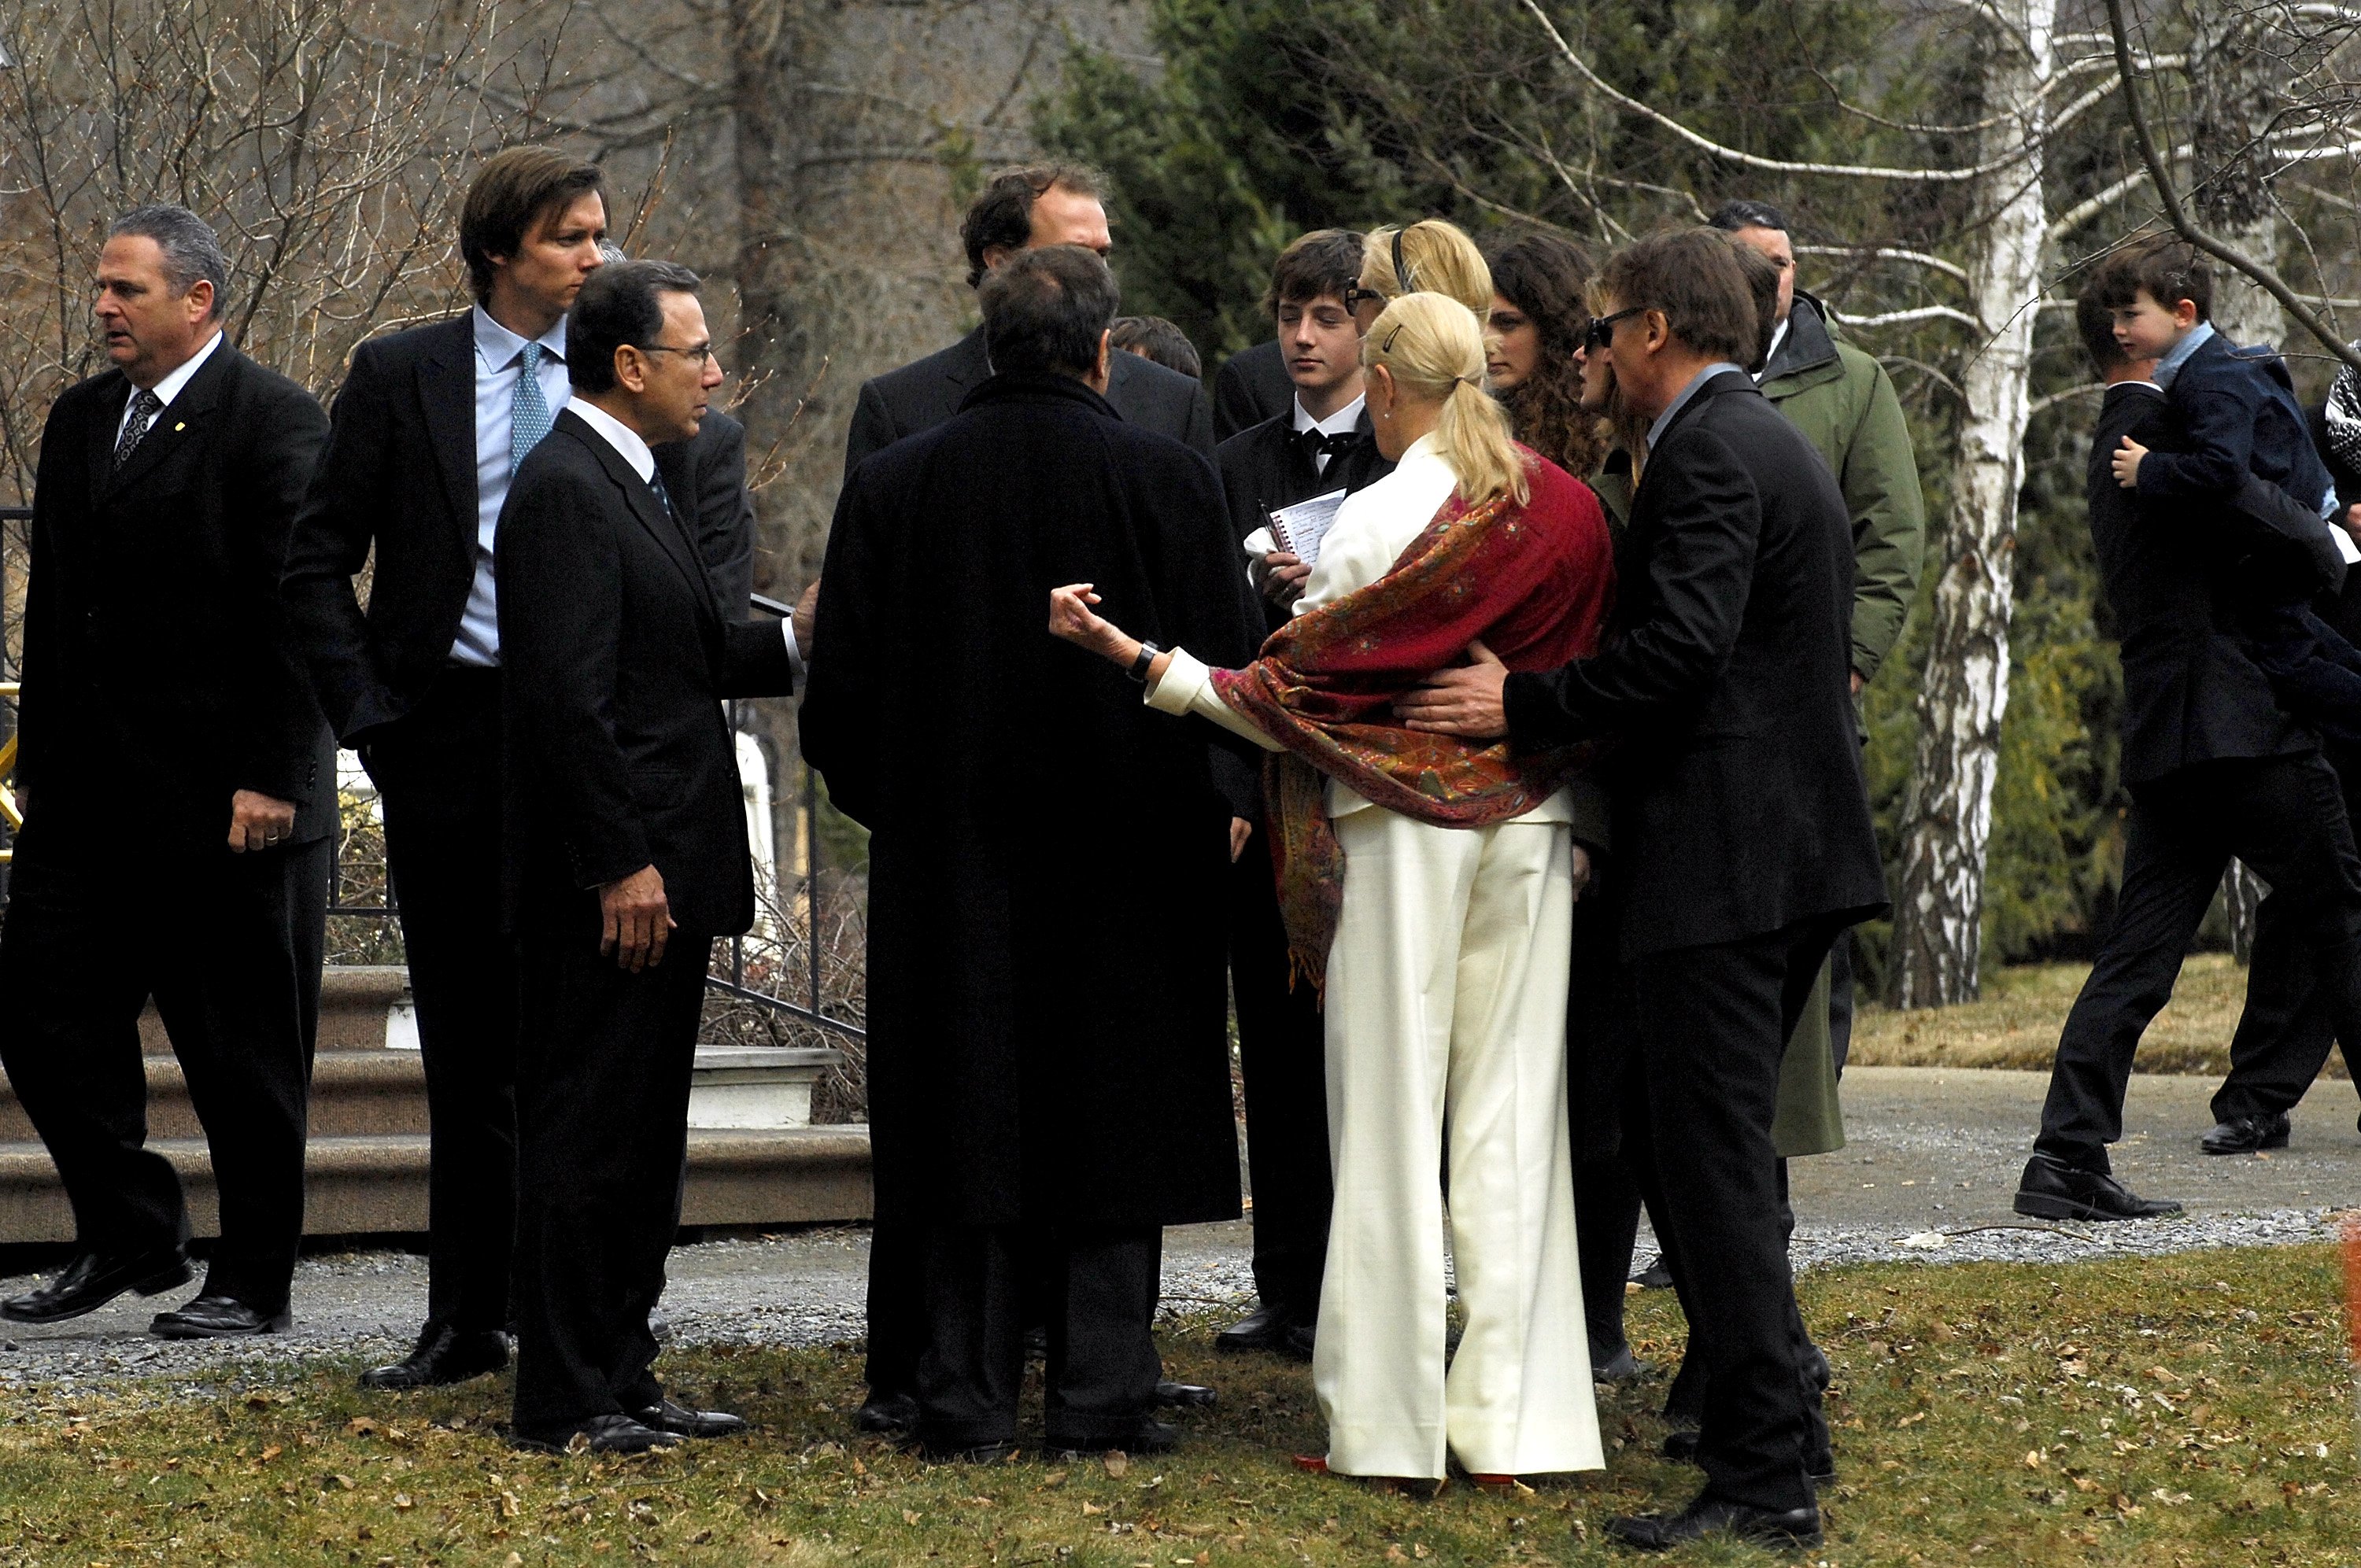 Vanessa Redgrave (2nd-R) and actor Liam Neeson (R) gather together with family prior to the funeral of actress Natasha Richardson at St. Peter's Lithgow Episcopal Church on March 22, 2009 in Lithgow, New York | Source: Getty Images 